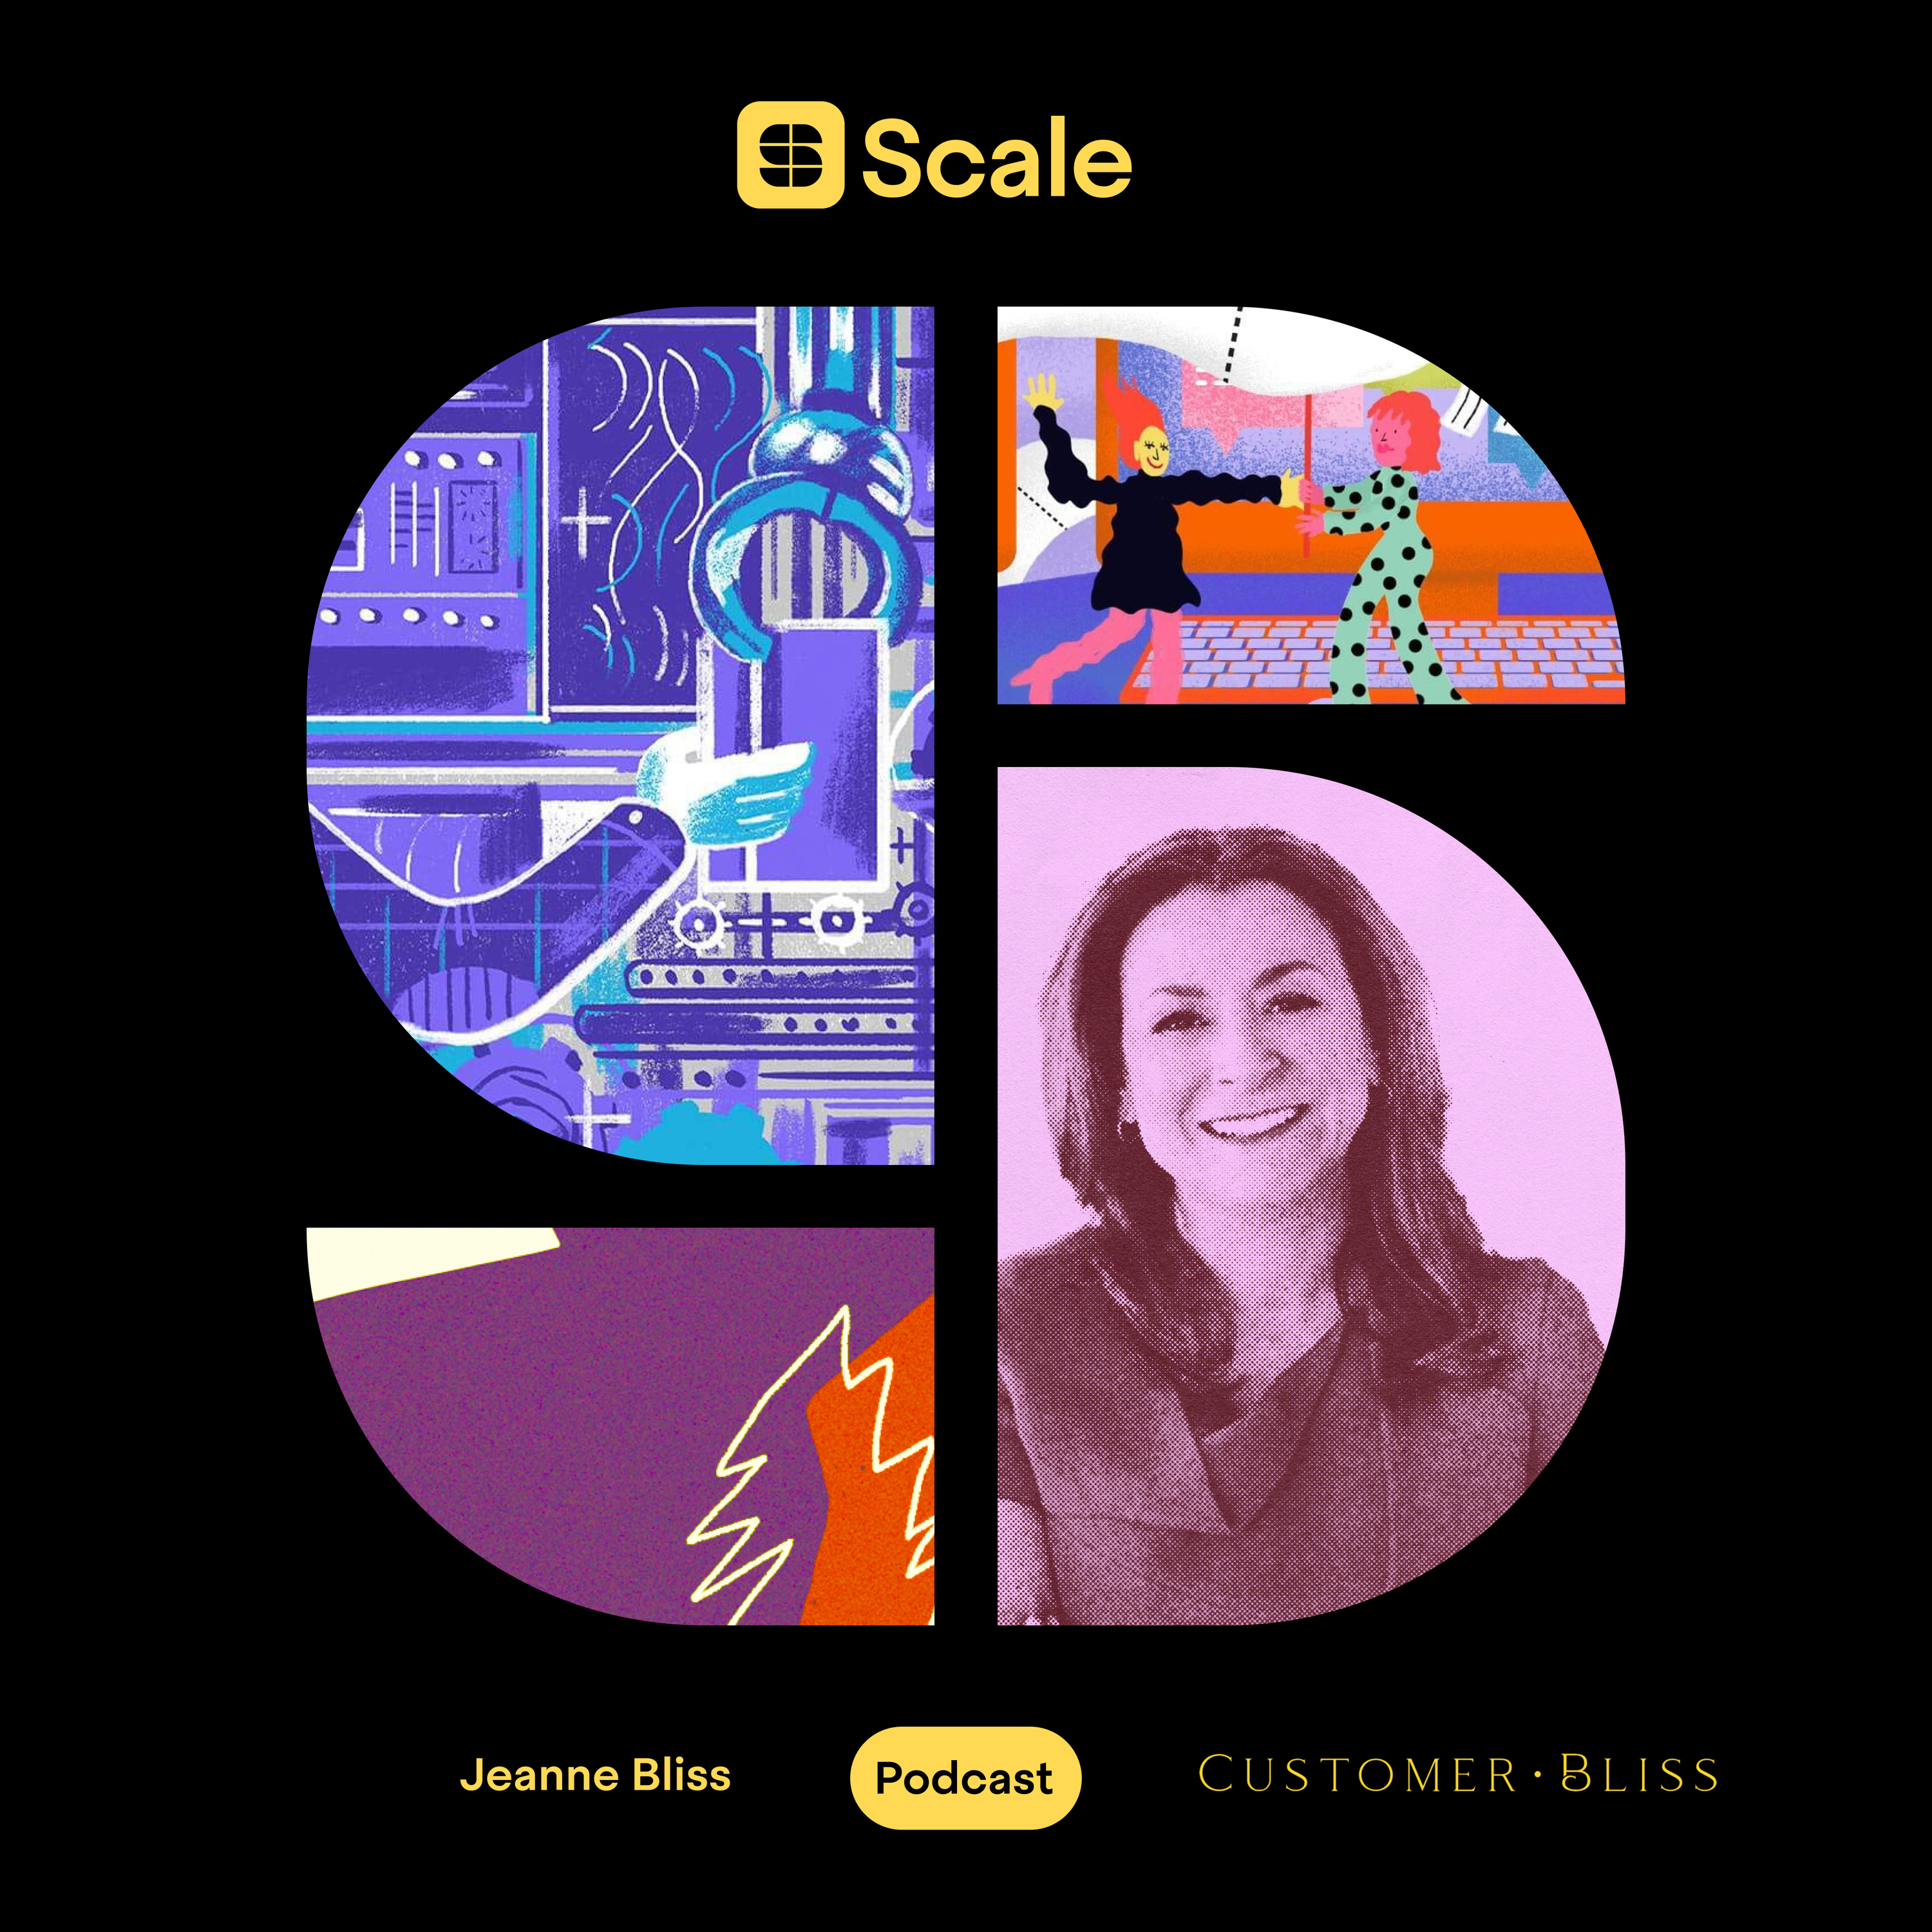 CX pioneer Jeanne Bliss on building customer-centric businesses